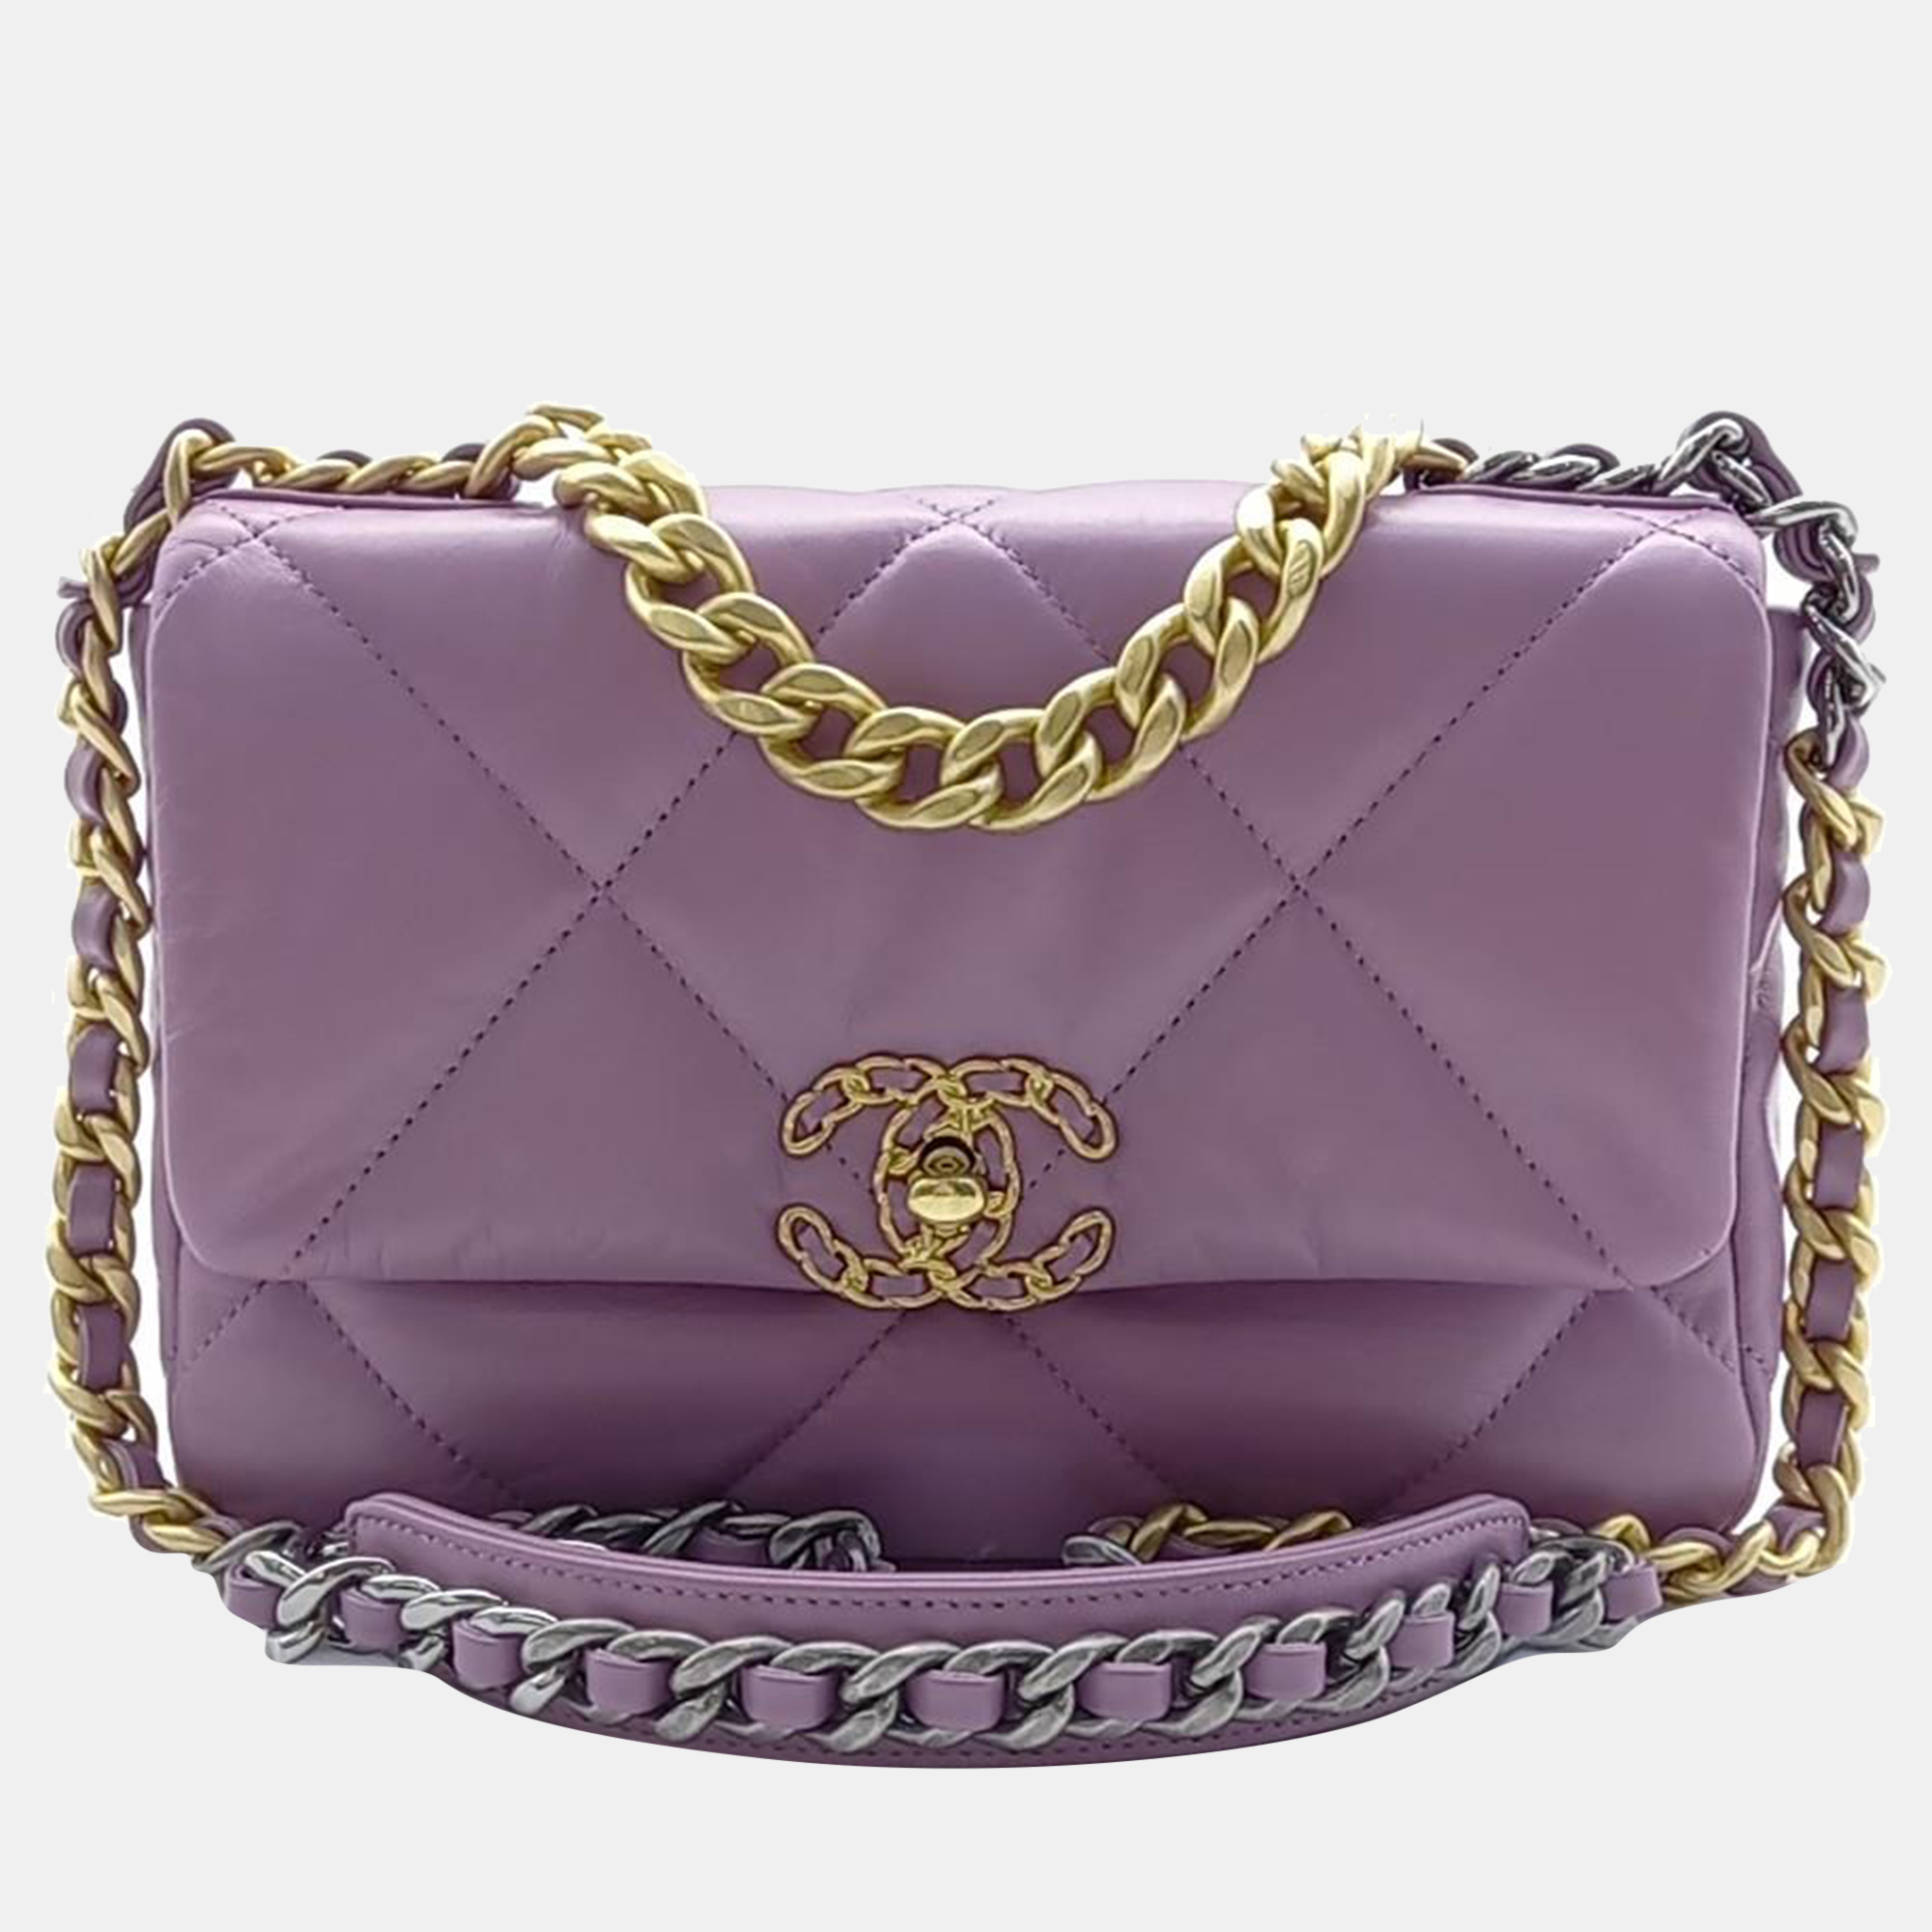 Pre-owned Chanel 19 Flap Bag Small As1160 Shoulder Bag In Purple